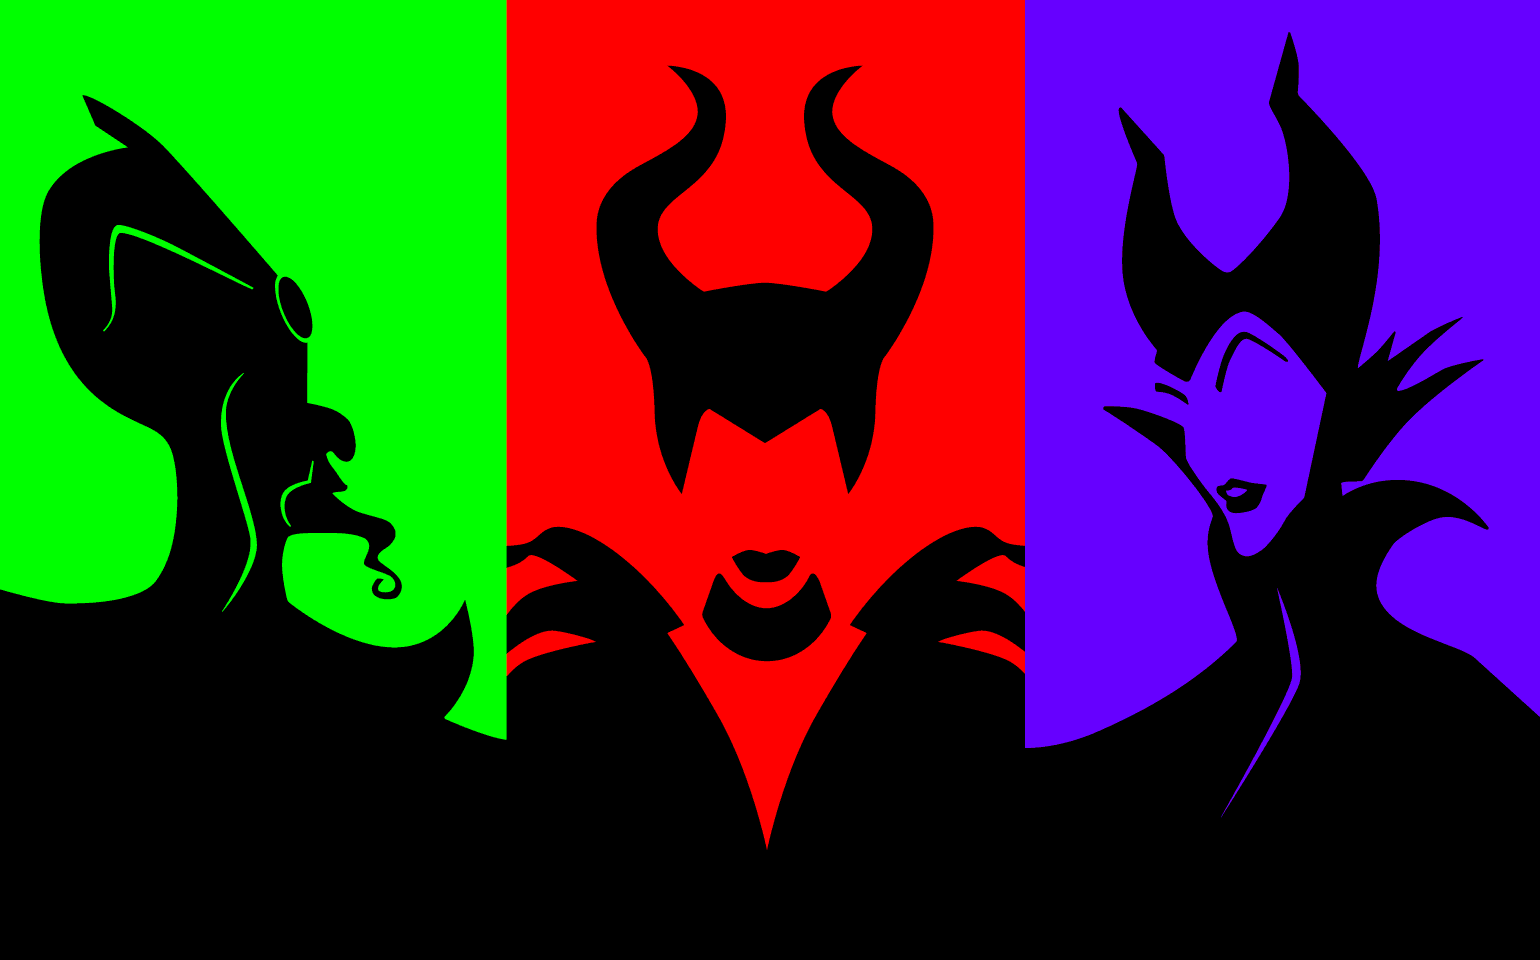 Some classic villains from literature are silhouetted.